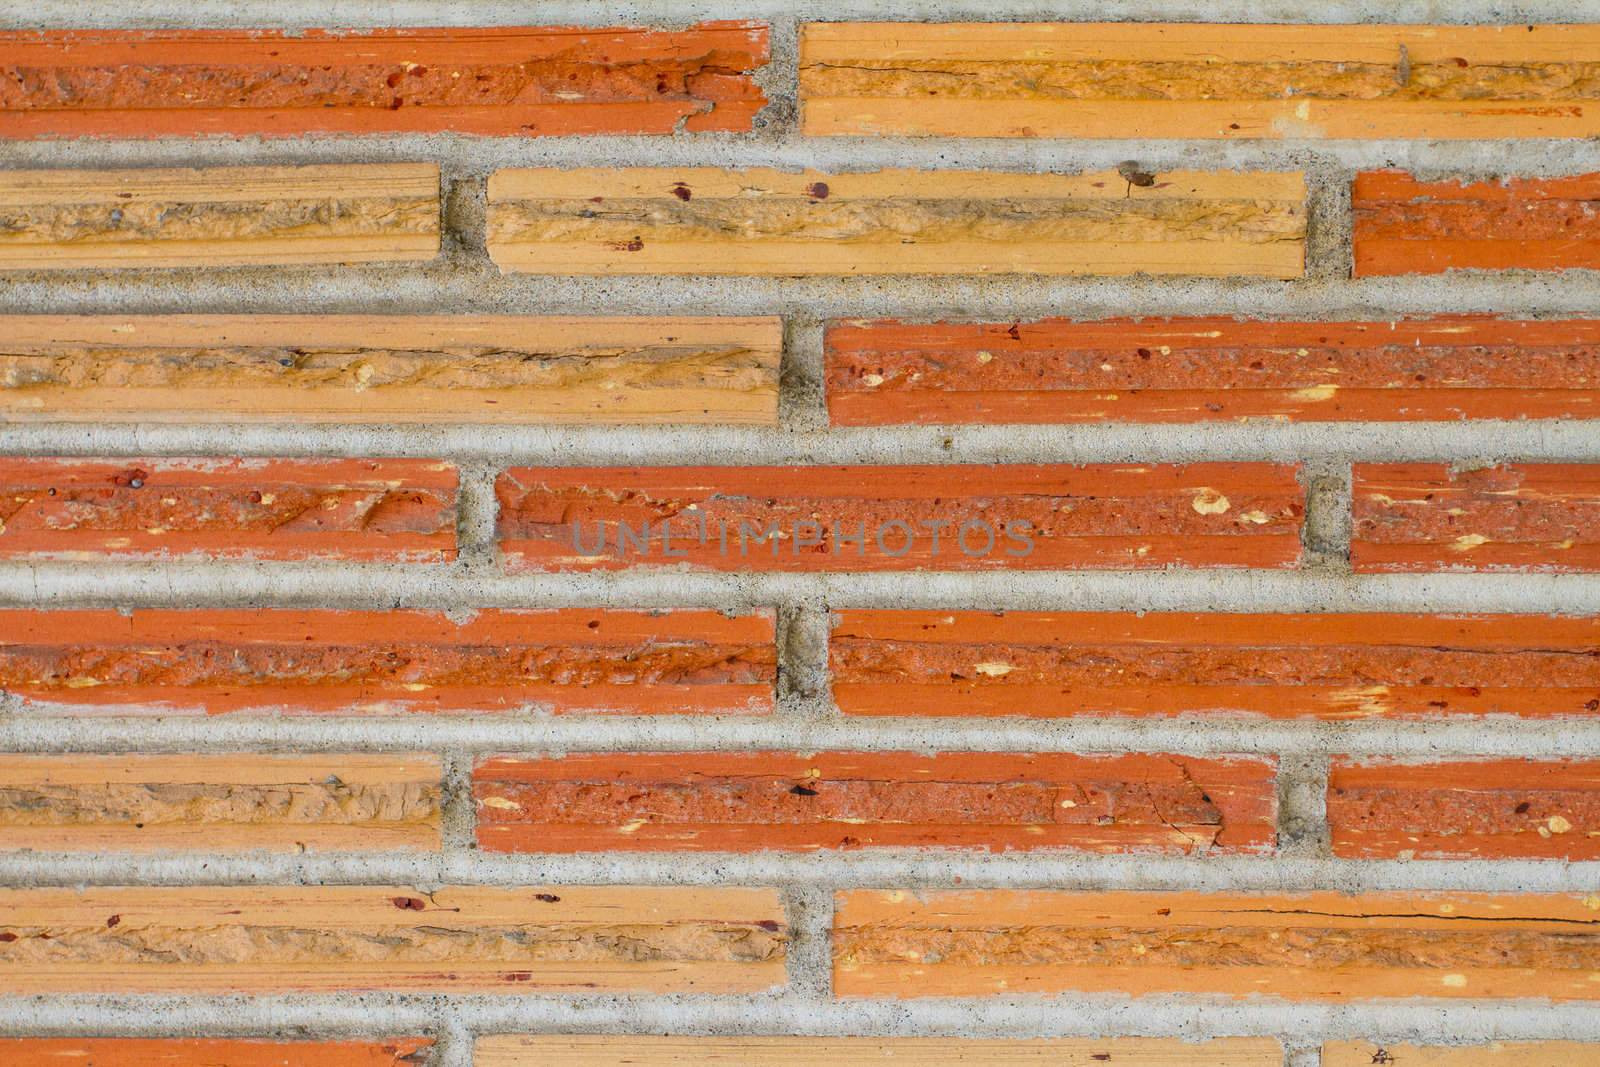 This texture image shows some thin bricks and mortar on the outside of a building.